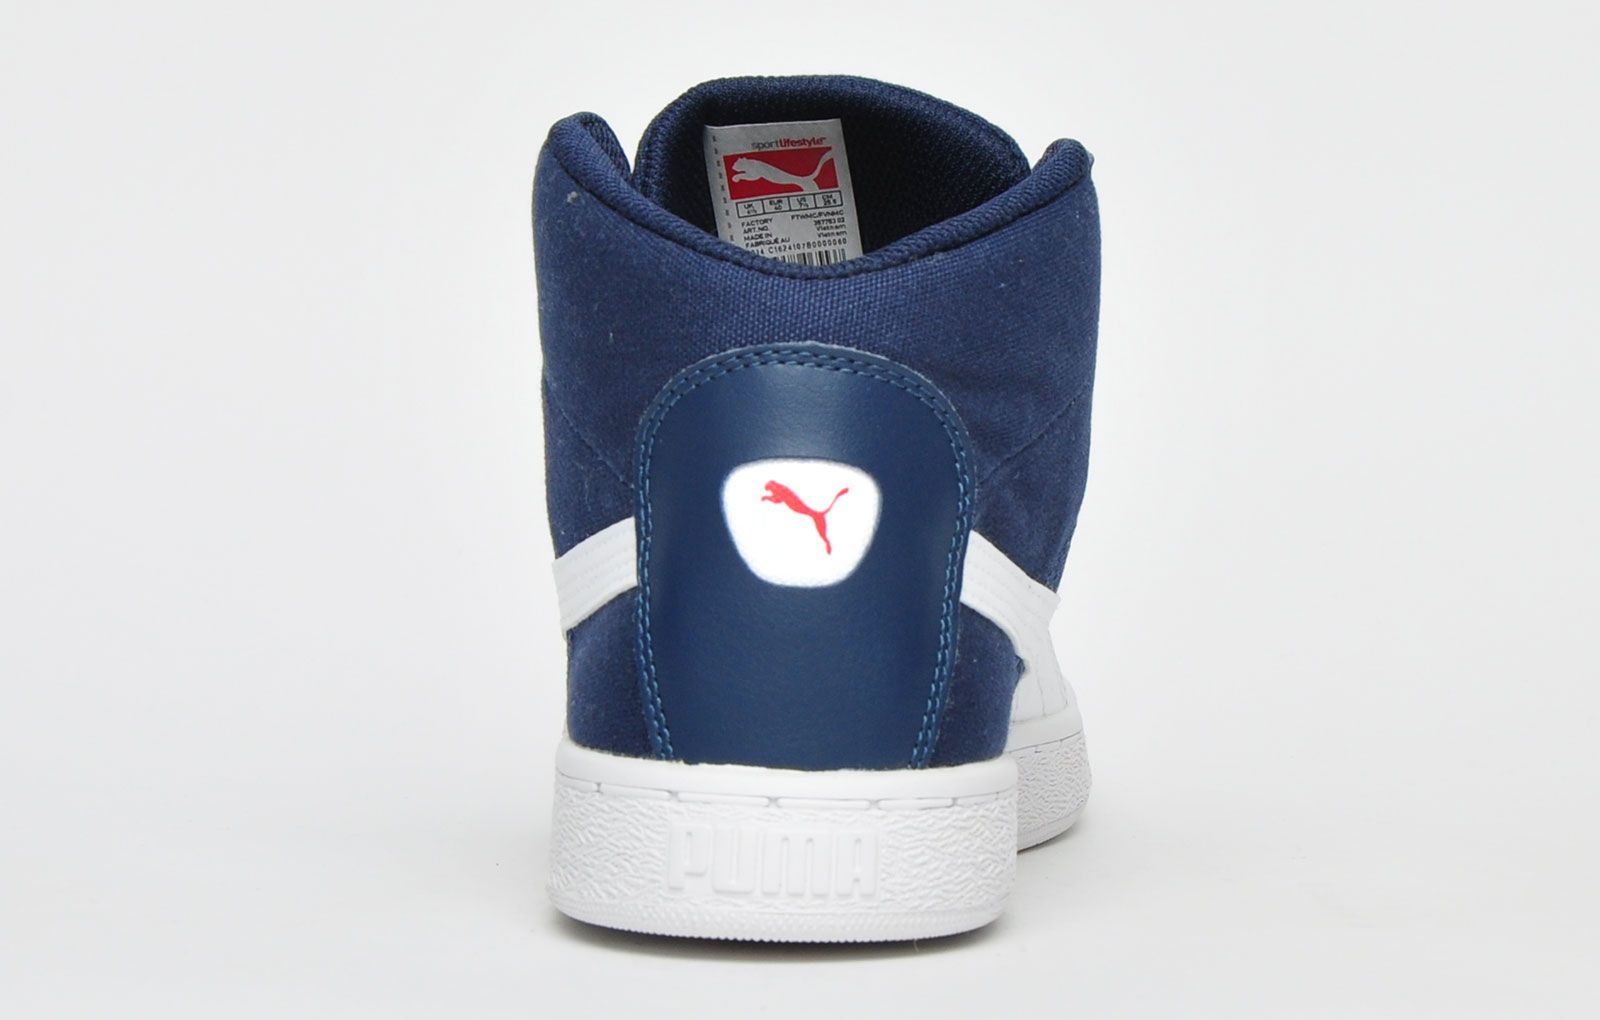 Puma always stood out as a brand that consistently offers iconic classic shoes. This ’48 Mid top canvas trainer is no exception, offering a premium styled upper with synthetic overlays, the 48 will make heads roll wherever it goes. <p>Featuring an EVA midsole and padded tongue and ankle collar – the 48 mid offers comfort like no other whilst the secure up-front lacing system and durable outsole offers lockdown stability across all wear. </p> <p>- Premium canvas upper </p> <p>- Mid top silhouette </p> <p>- Secure up-front lacing closure </p> <p>- Synthetic overlays for added style</p> <p>- PU heel cage for added stability </p> <p>- Vintage inspired outsole </p> <p>- Puma branding throughout </p>